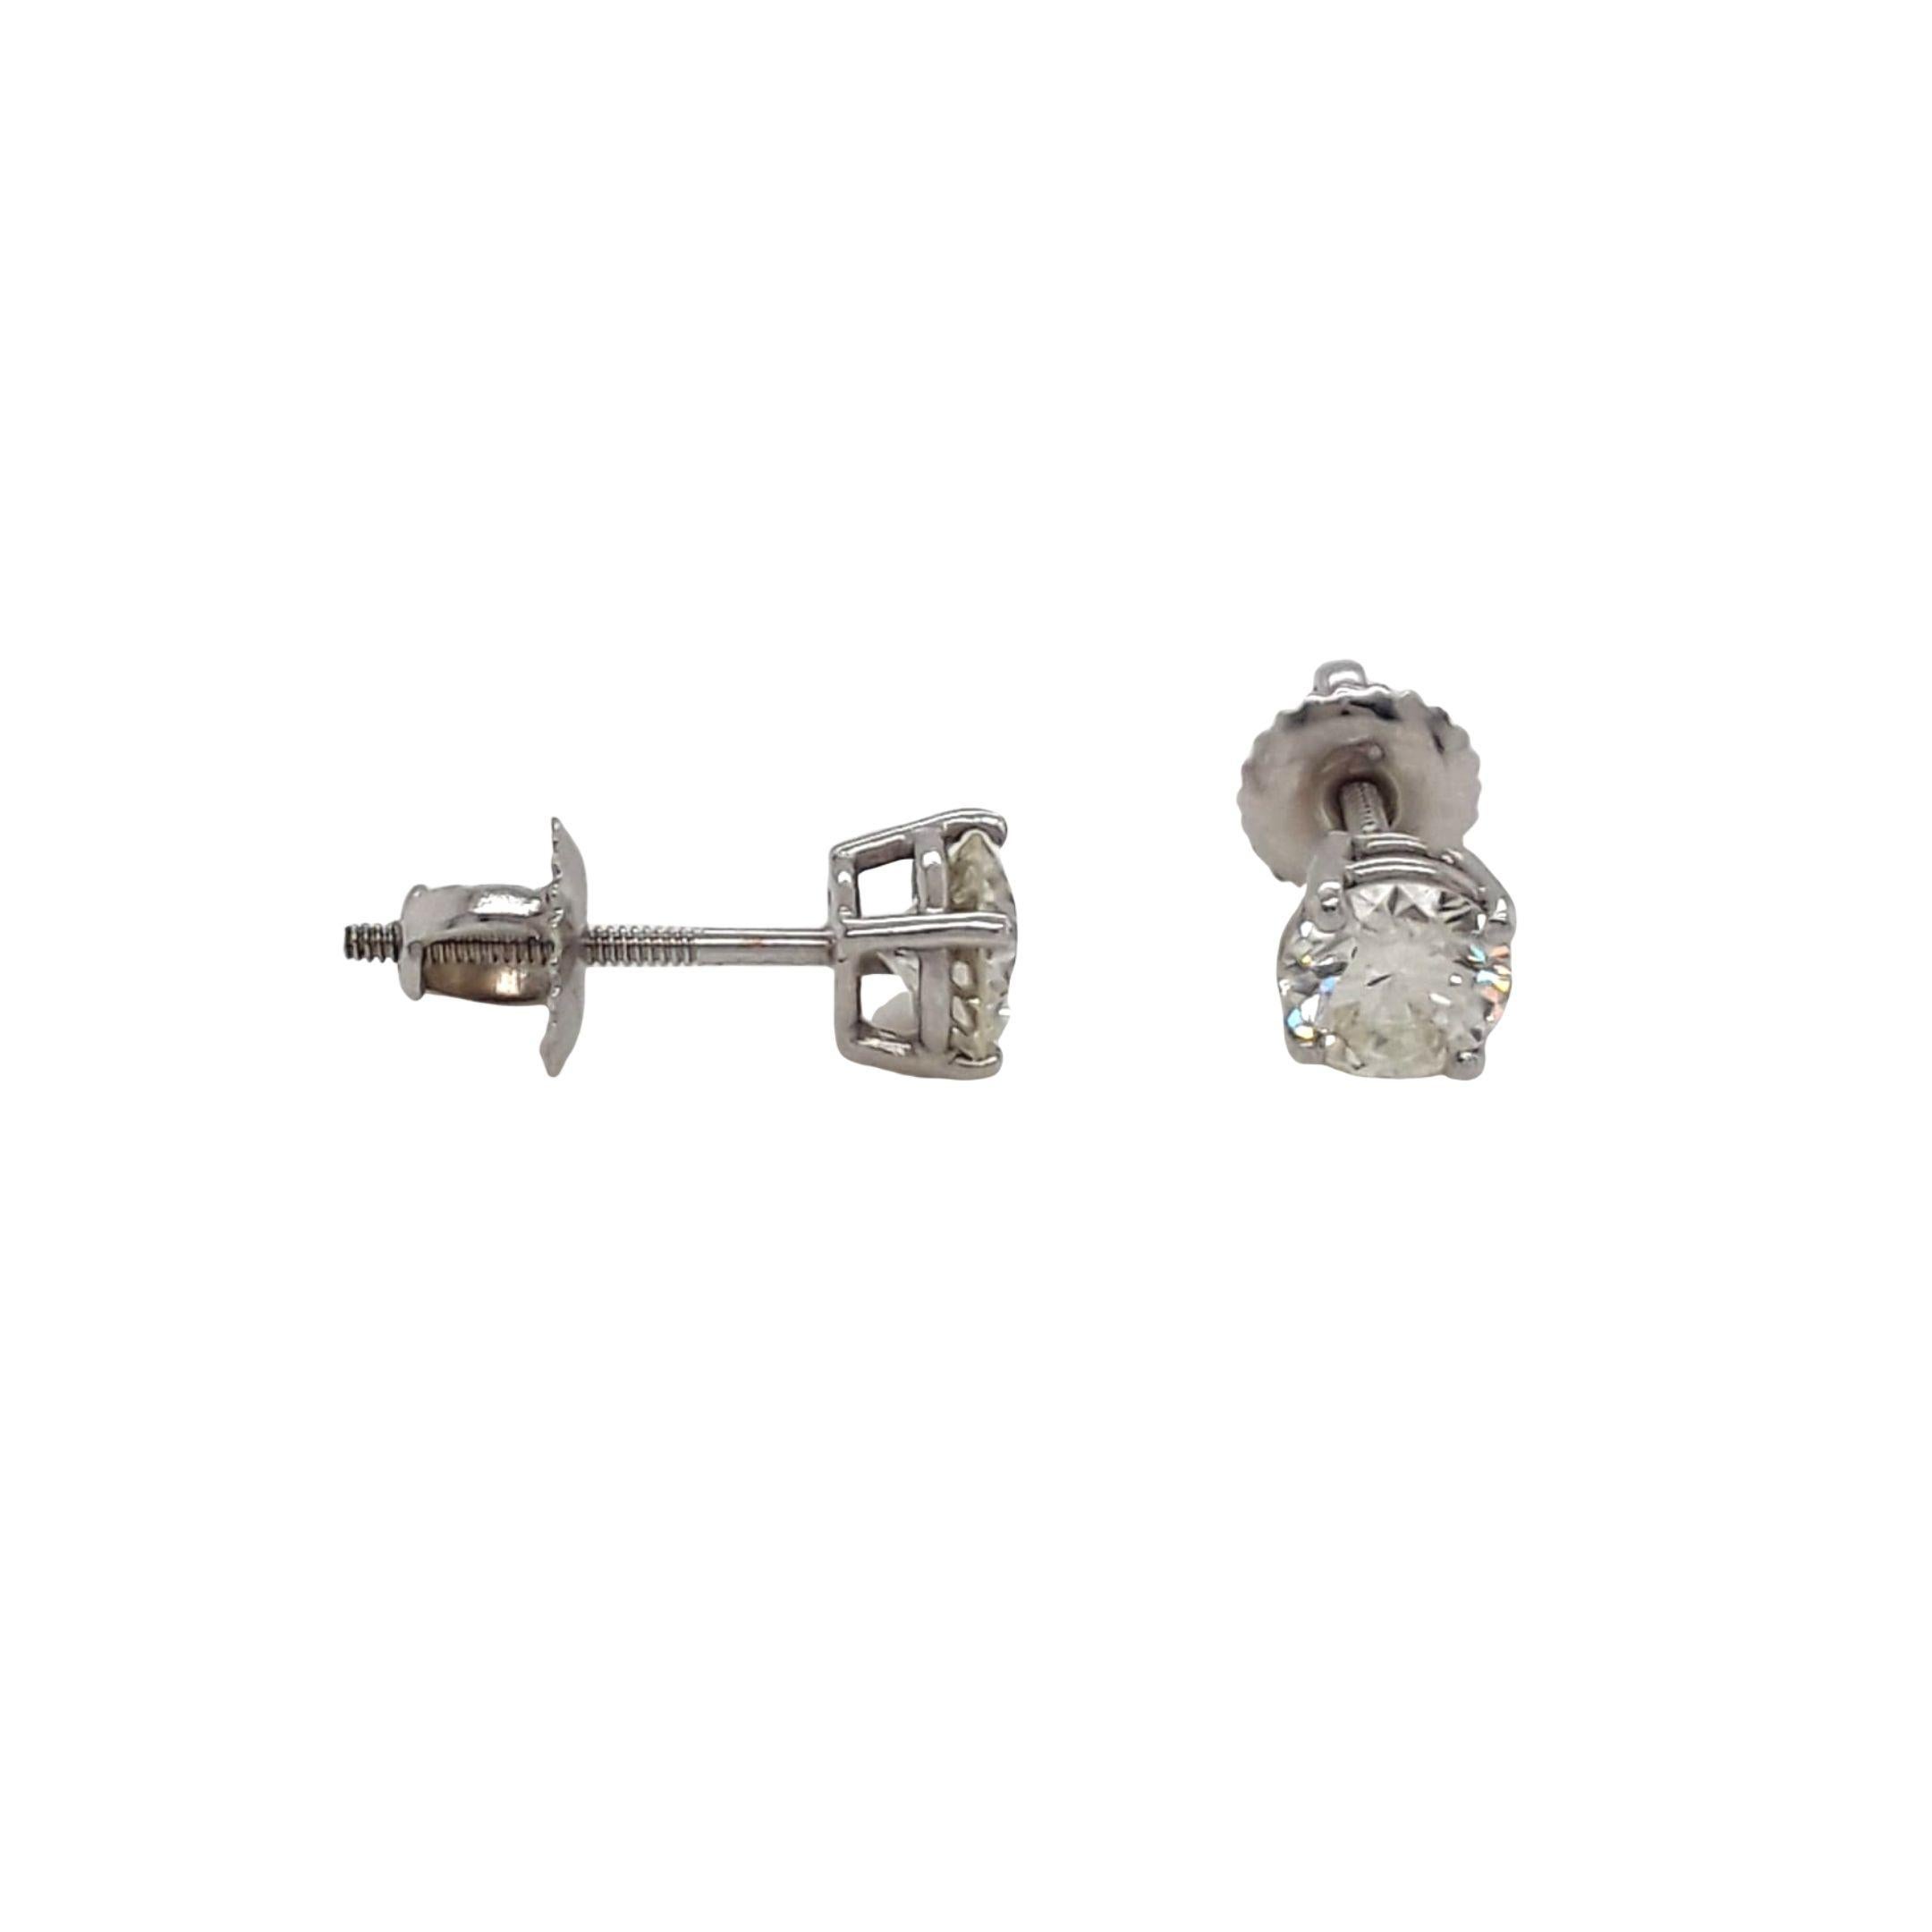 Diamond Stud Earrings made with natural brilliant cut diamonds. Total Weight: 1.12 carats, Stone Diameter: 5.23 x 5.25. Set on a 4 prong mounting in 18 karat white gold, screw back setting. 